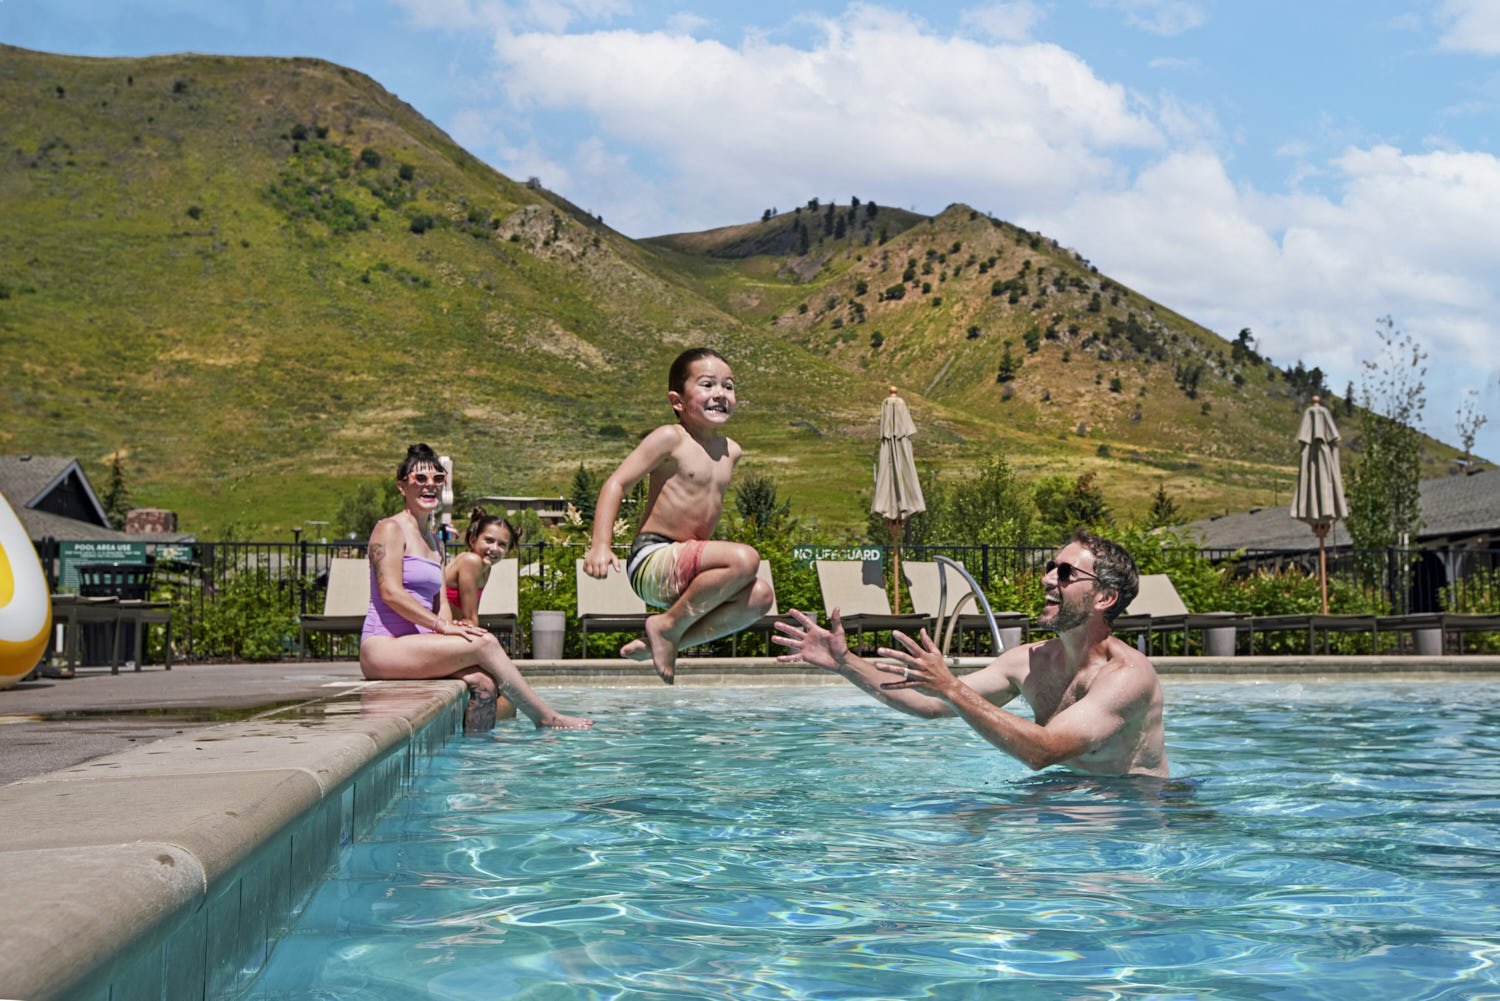 Knoxy_Knox_Lifestyle Photographer_Outbound Hotels_Summer_Mixed Race Family_Hotel_Mountains_Swimming_Pool_Jackson_Wyoming_6443.jpg